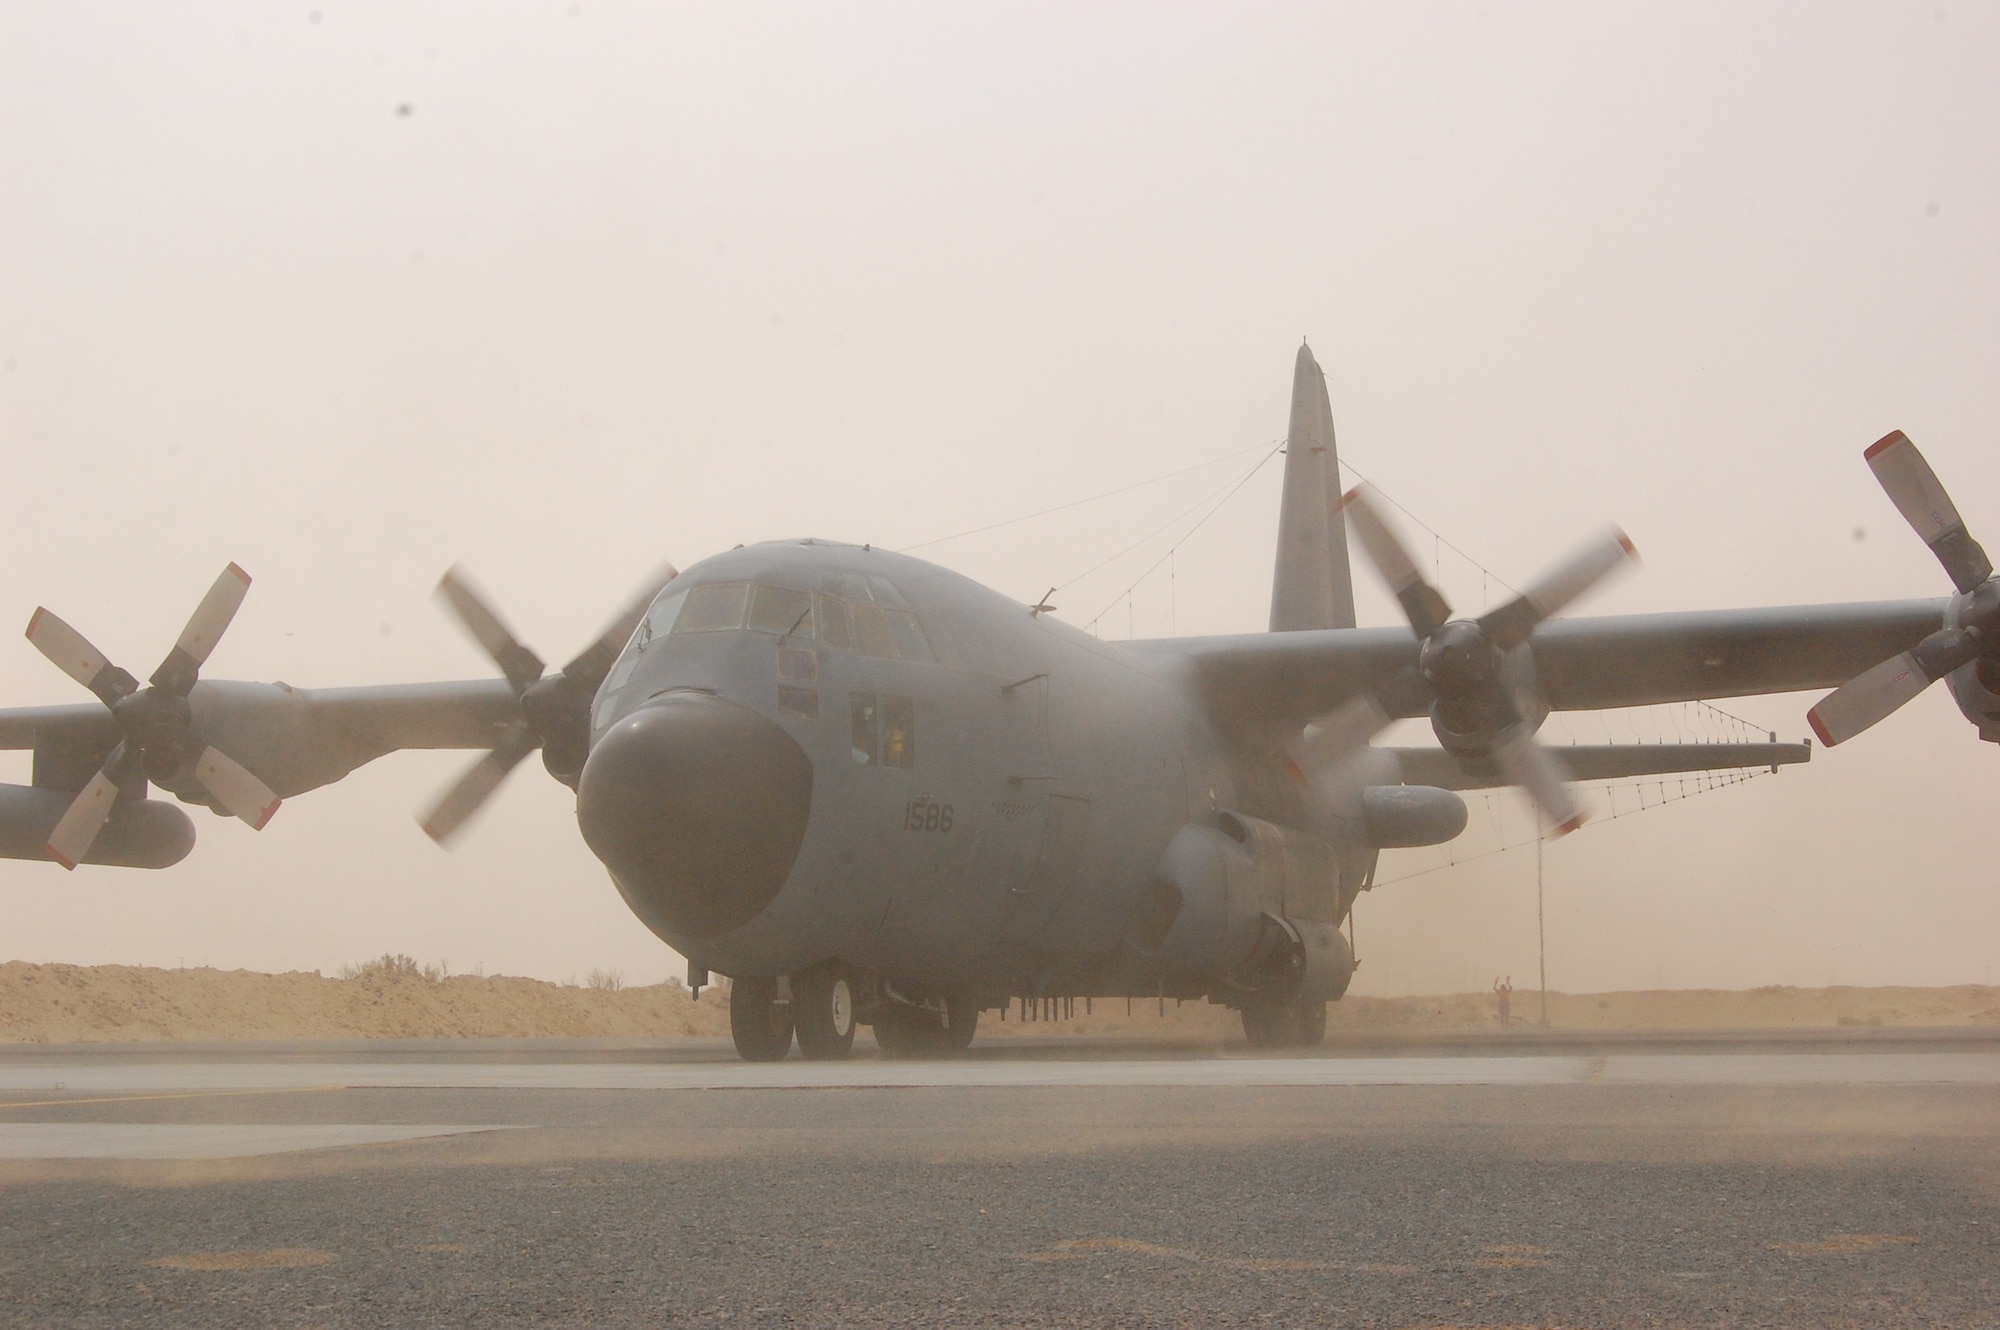 SOUTHWEST ASIA – The 4,591 prop shaft horsepower of two Allison T56-A-15 turboprops kicks up dust and pebbles from the parking ramp during an EC-130H Compass Call reverse engine thrust as it backed into position at an air base in the Persian Gulf Region March 18, 2008. Aircraft tail number 1586 is deployed from the 55th Electronic Combat Group out of Davis-Monthan Air Force Base, Ariz., and was flown on the 43rd Expeditionary Electronic Combat Squadron’s 2,276th combat sortie marking the Arizona-based unit’s fourth consecutive year deployed supporting the Global War on Terror. (Air Force photo/Tech. Sgt. Michael O’Connor)